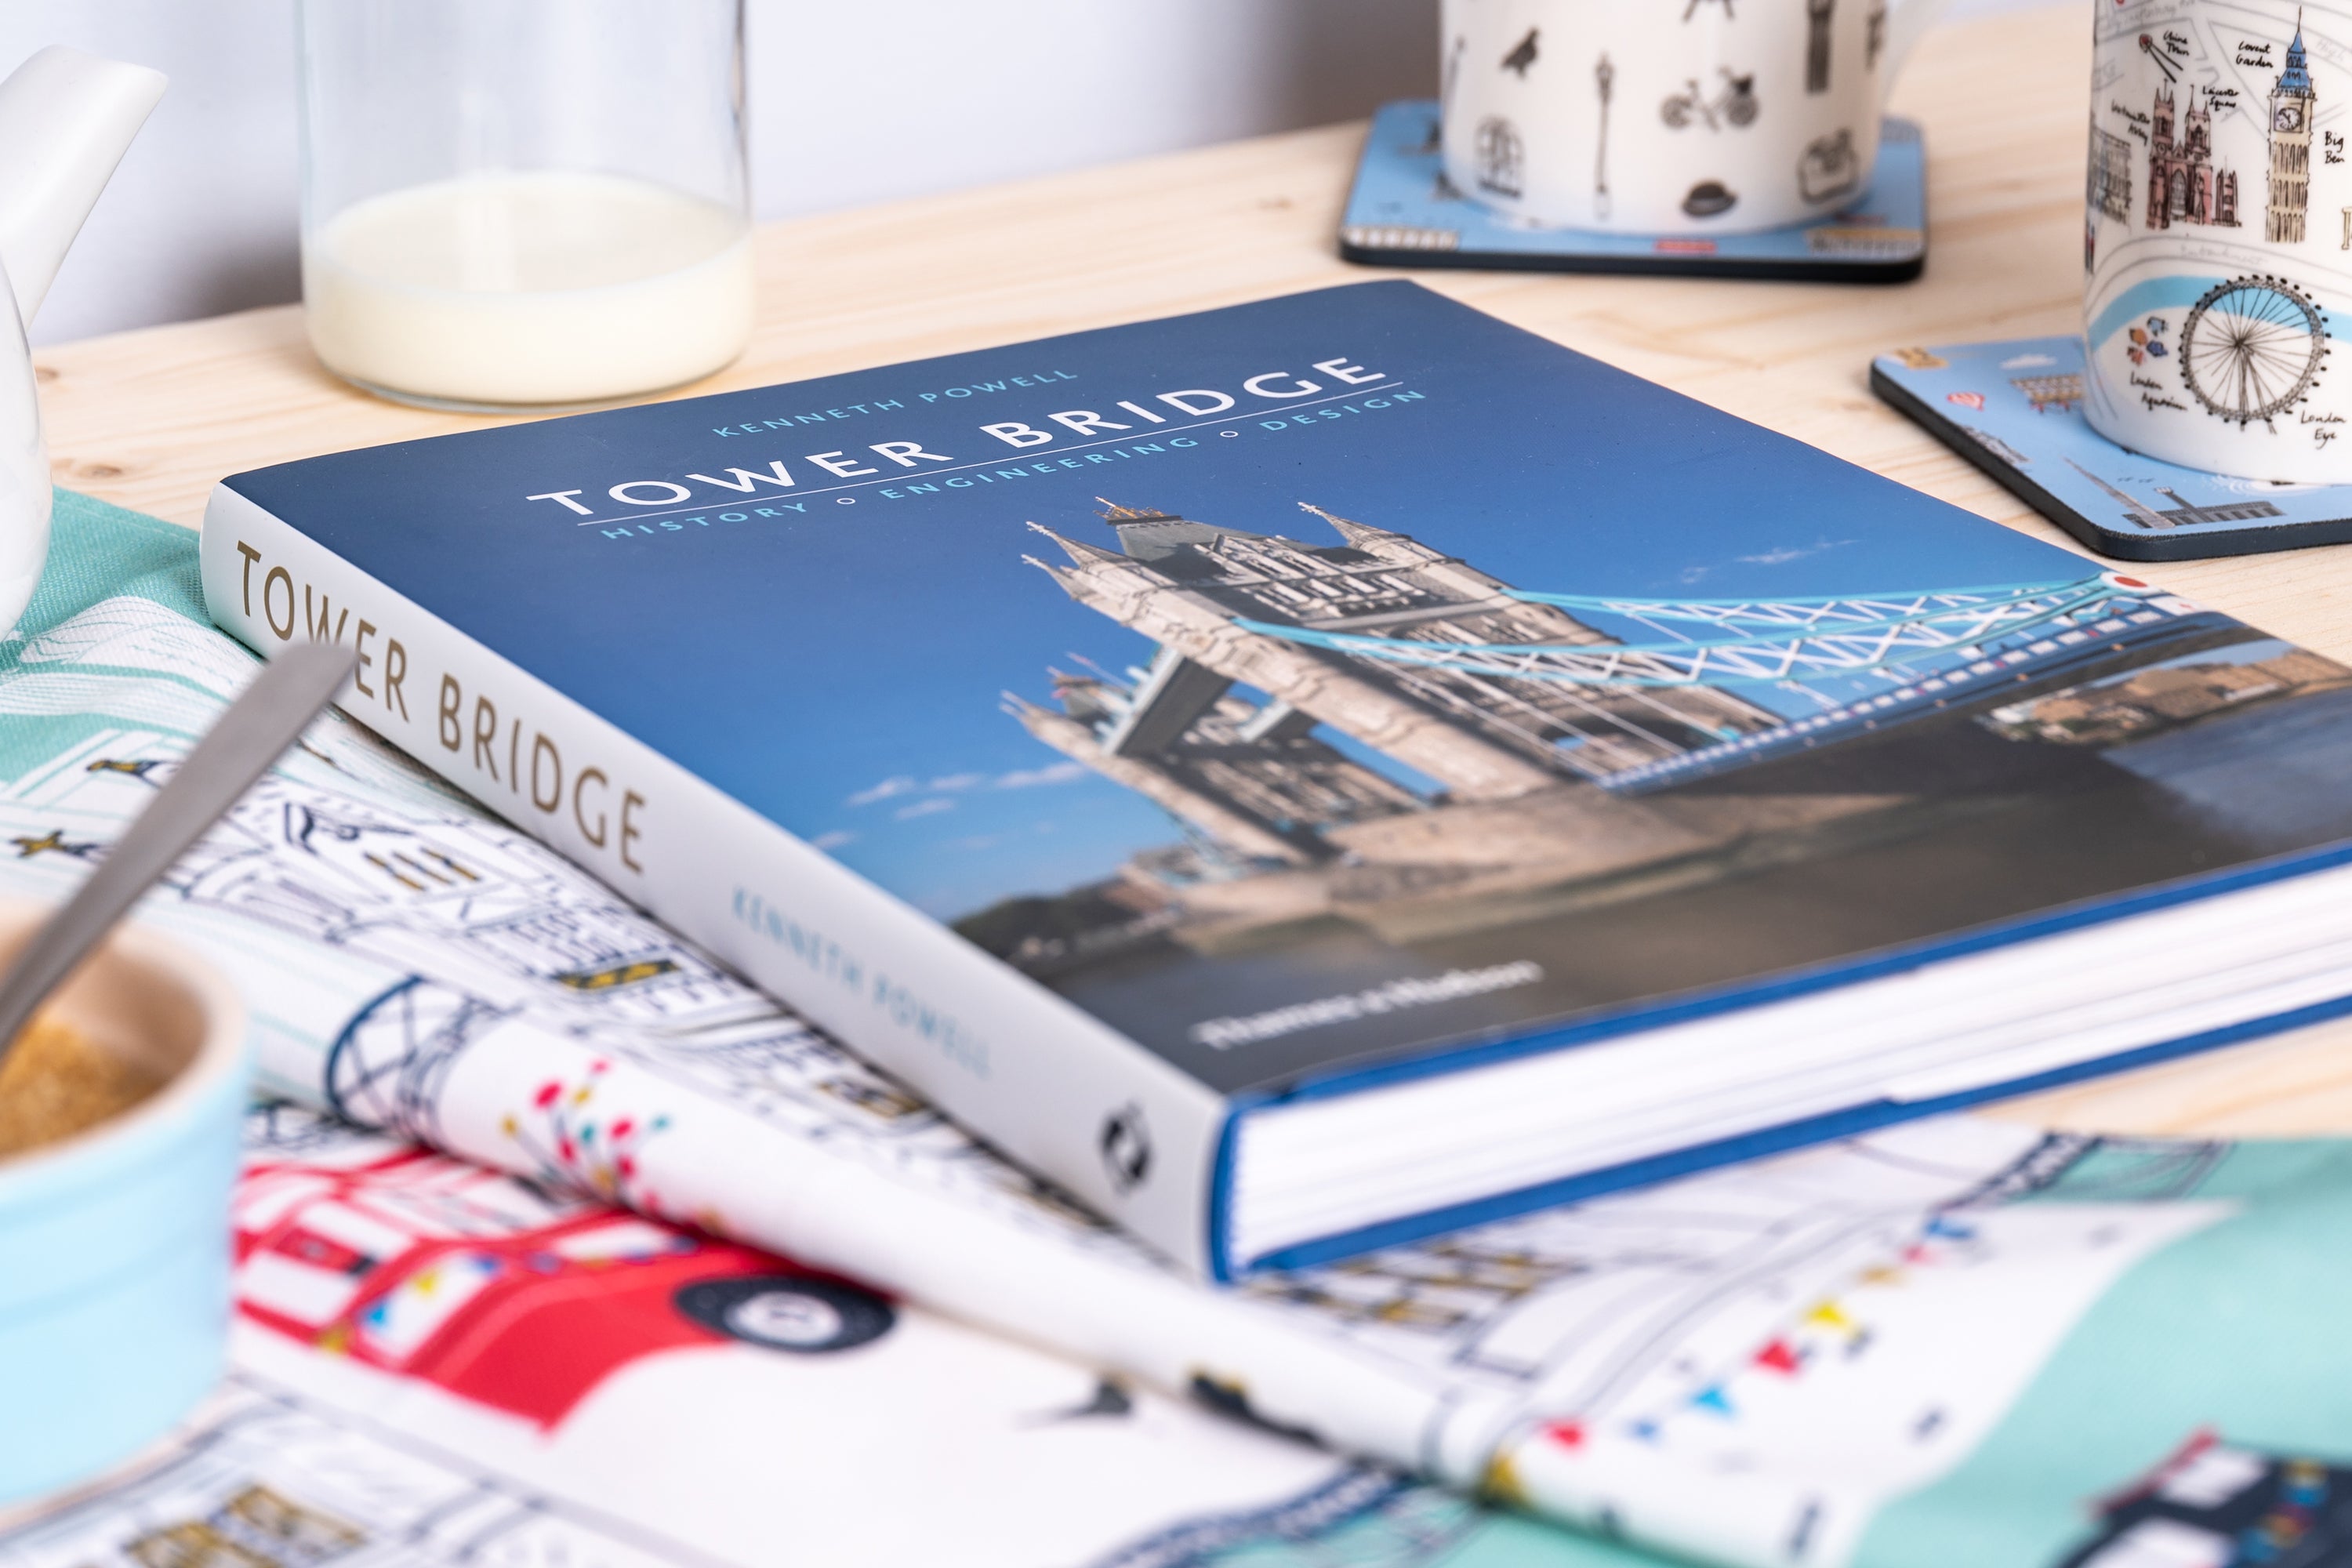 The definitive book on Tower Bridge is part of our Summer Sale 2021